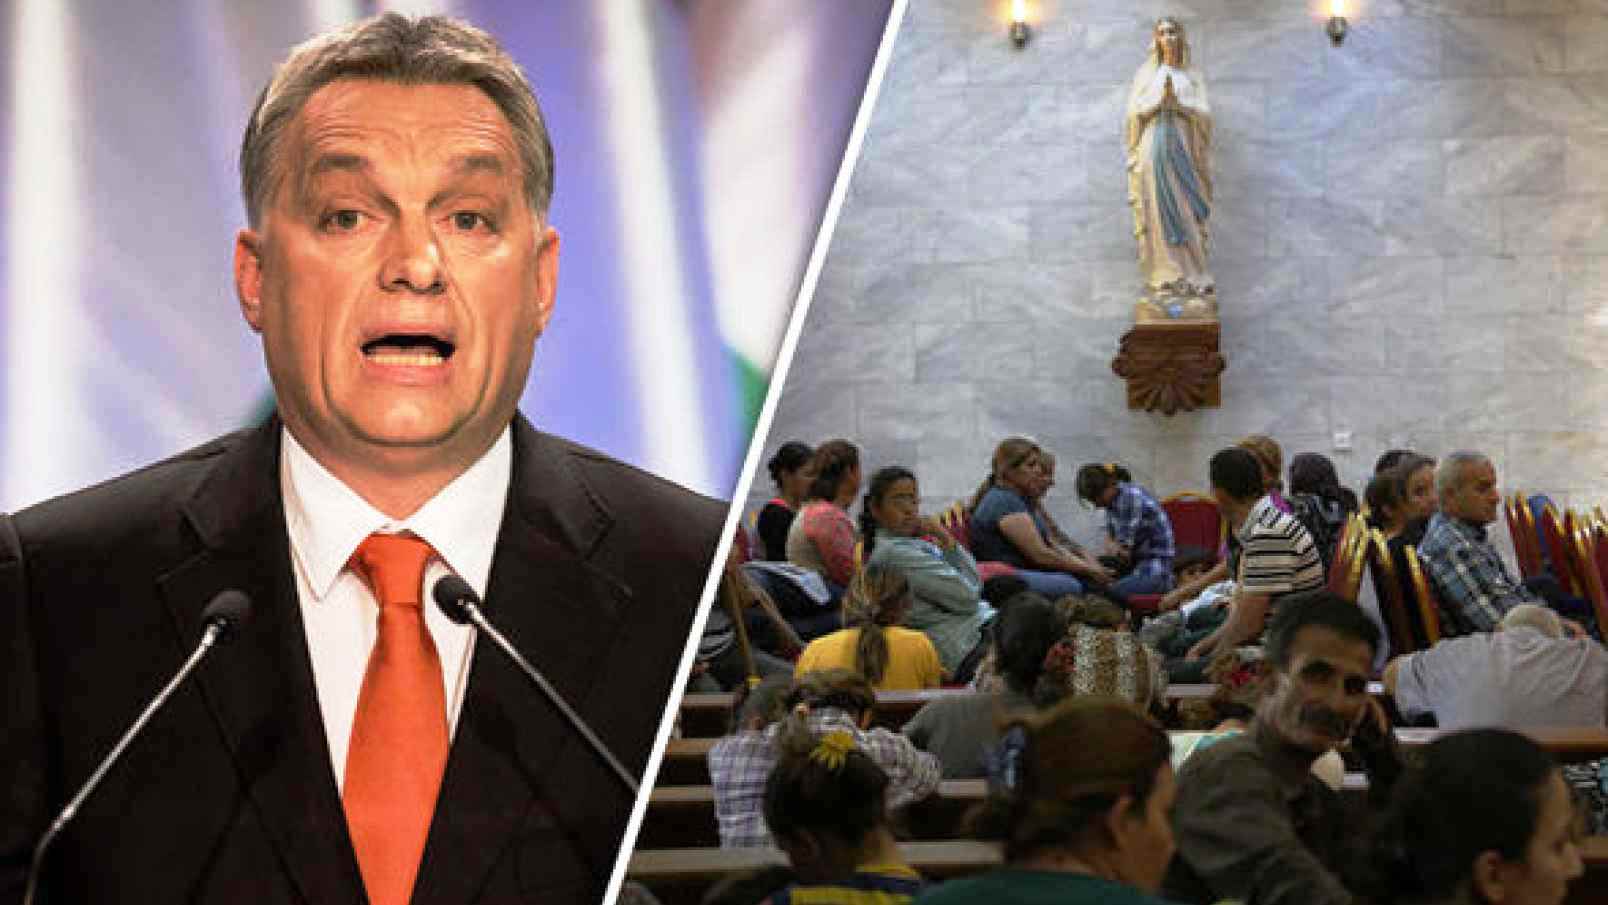 Hungary Opens Office for Persecuted Christians